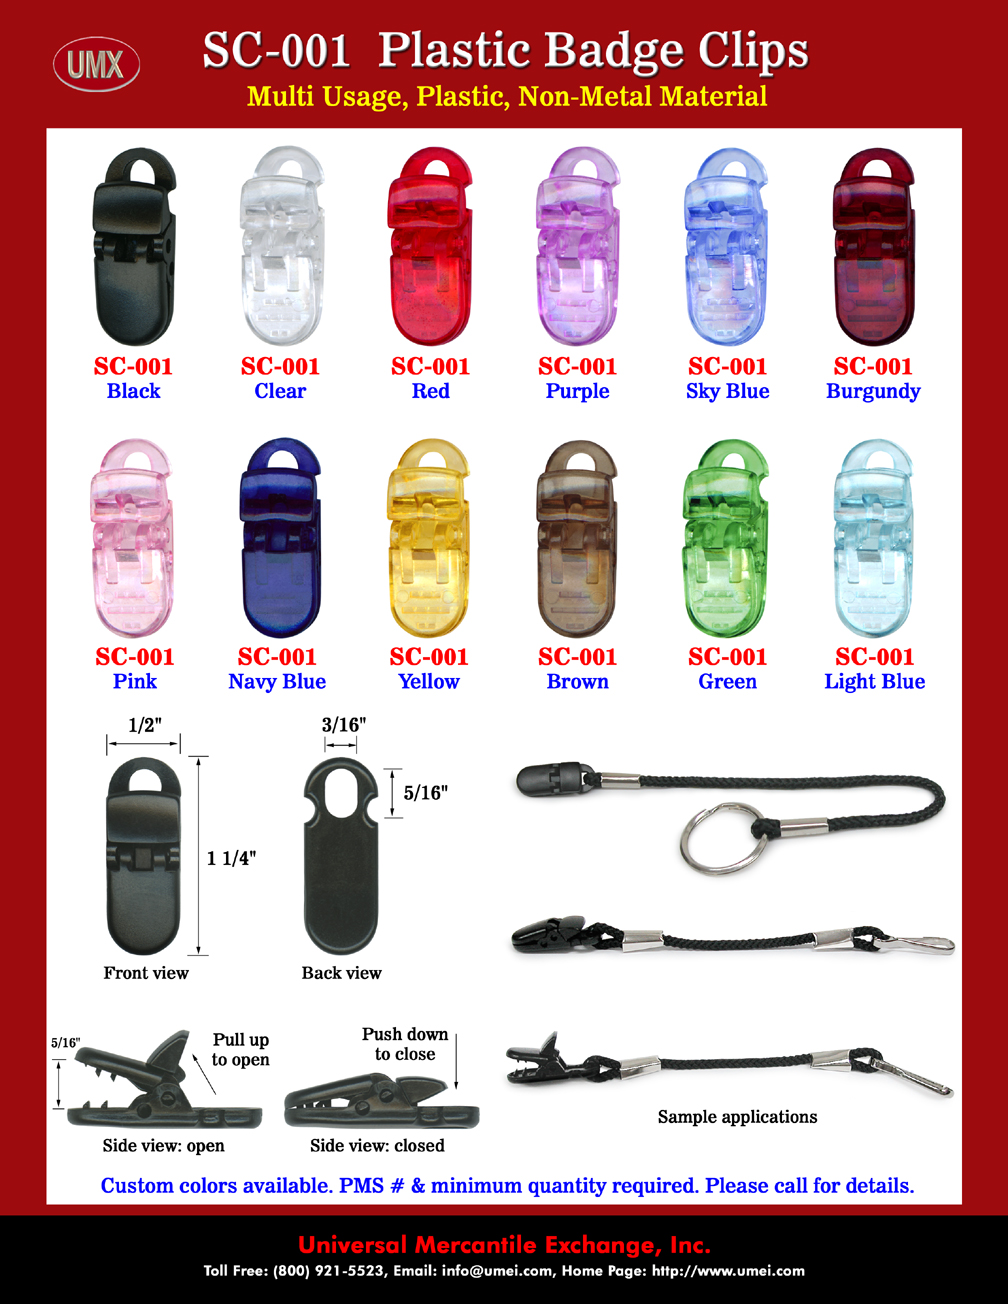 Plastic Badge Clips For Plastic Name Badges or IDs